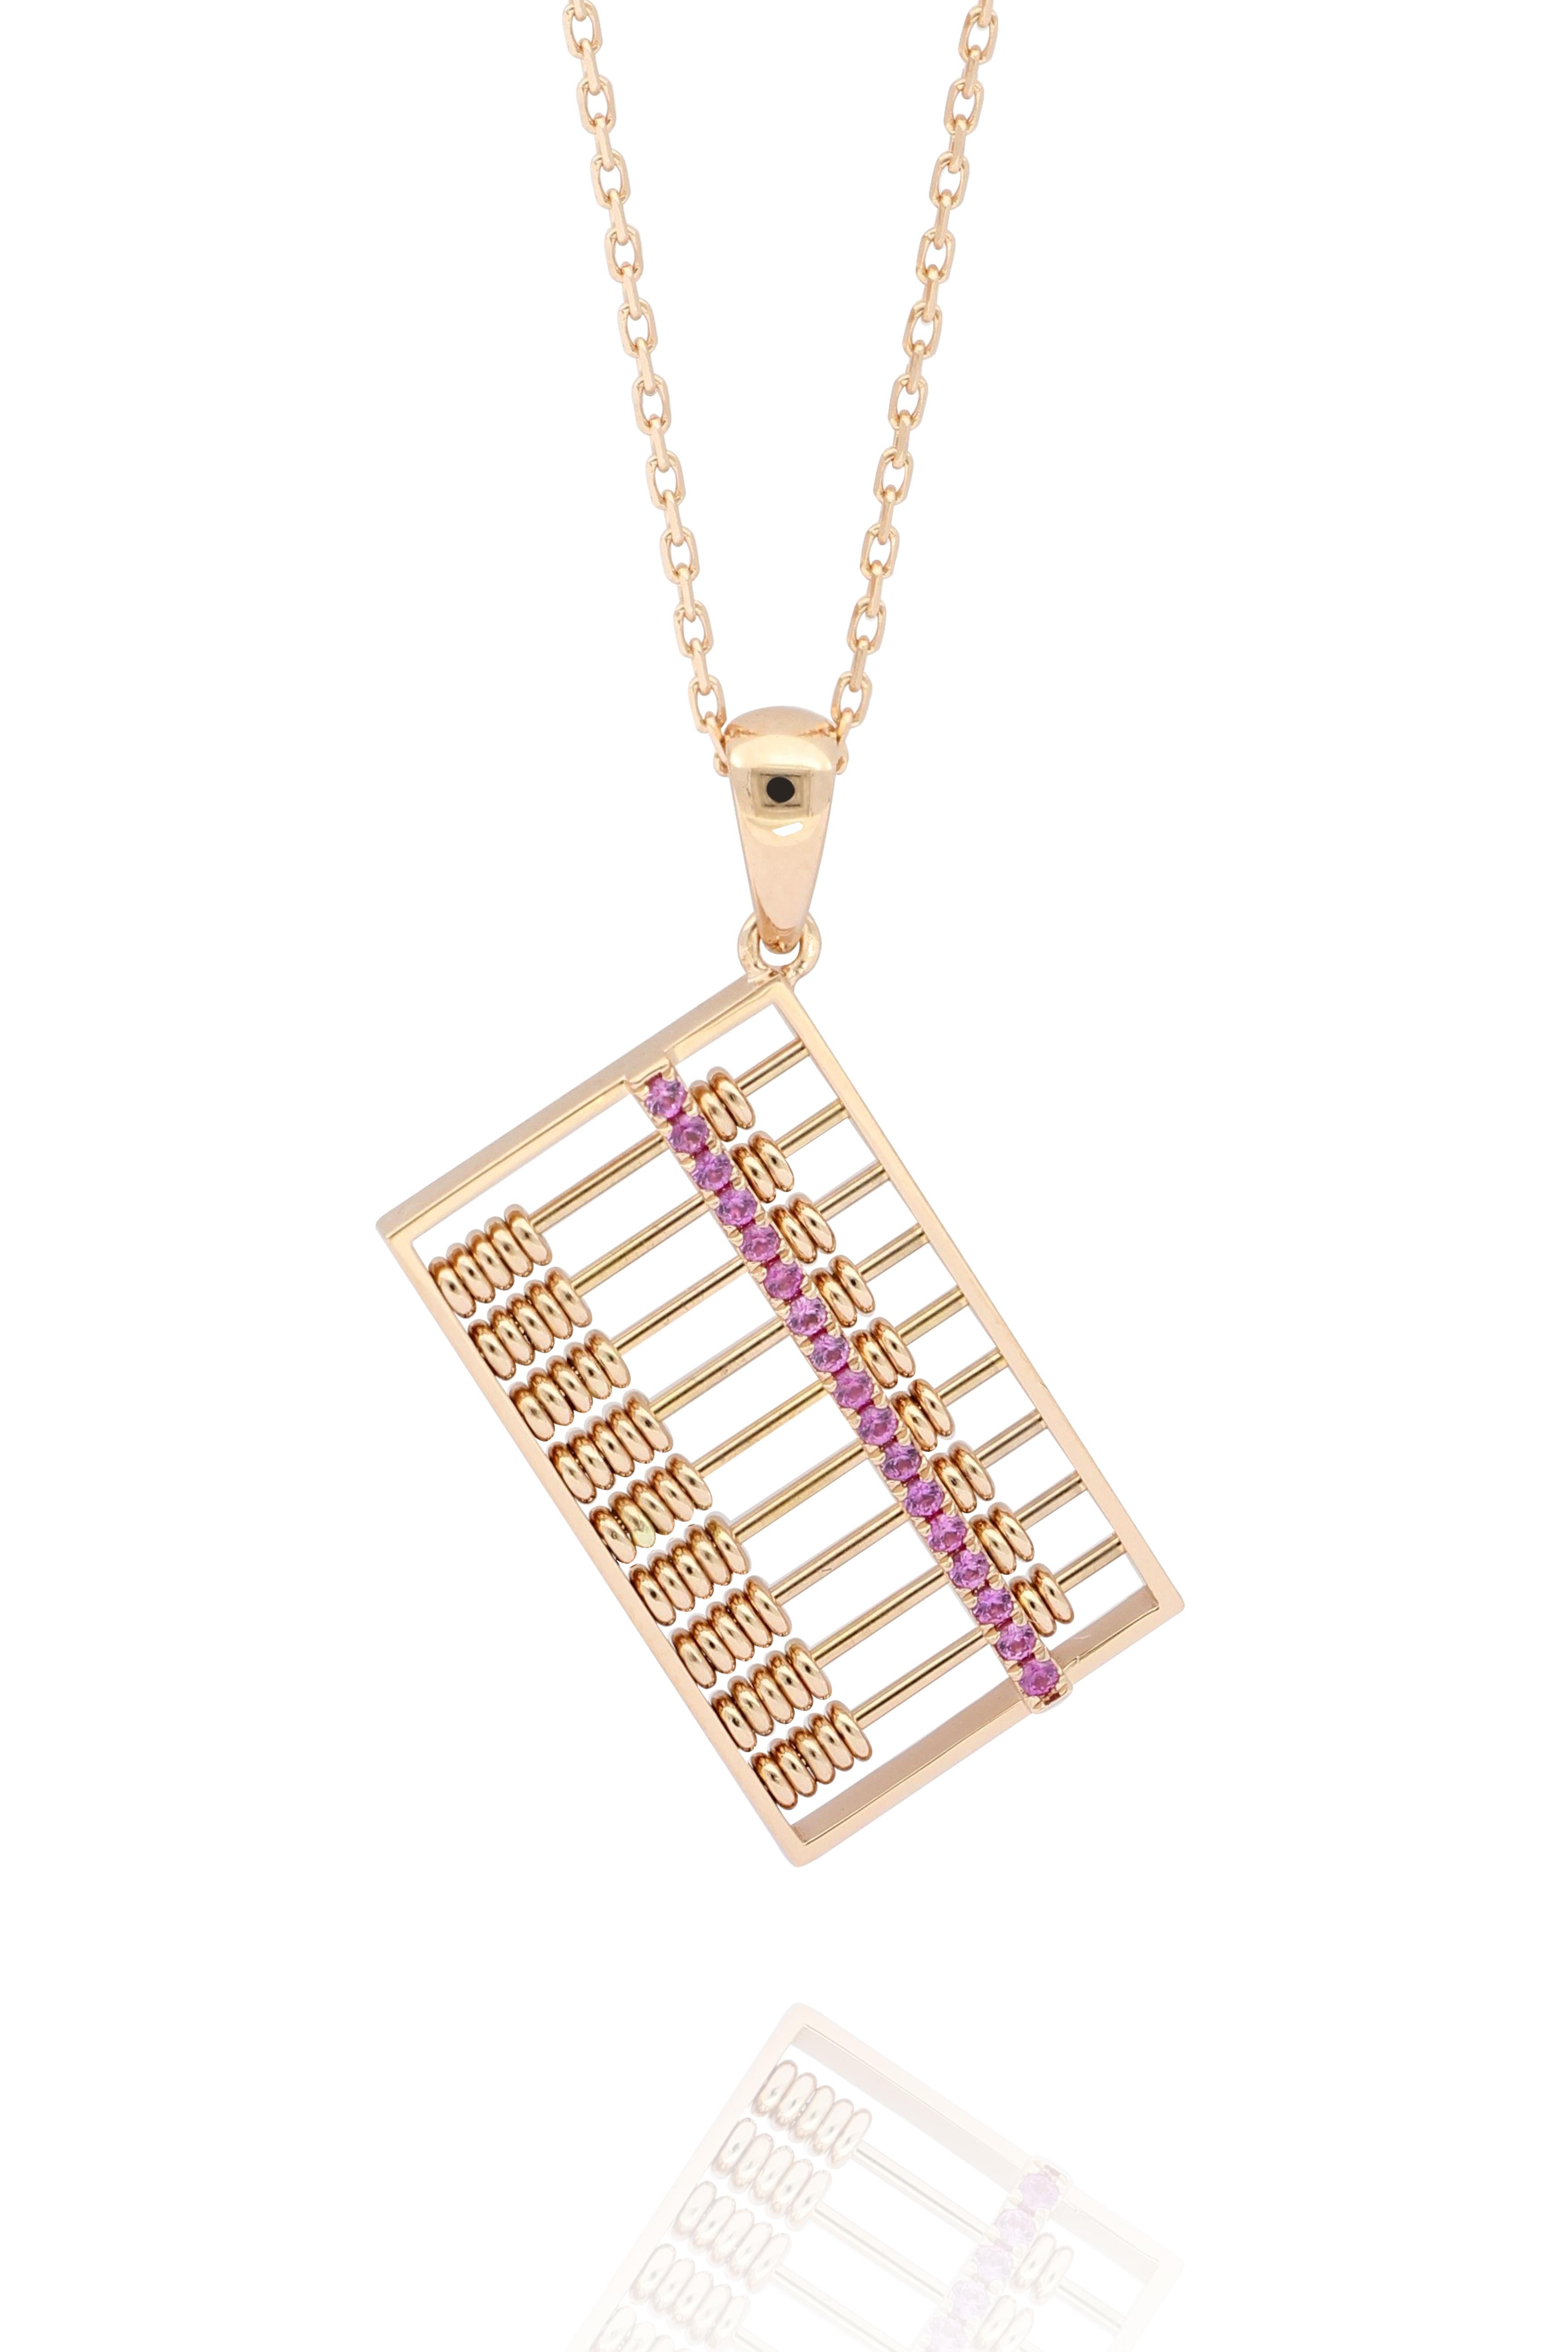 Abacus pendant with moving beads, decorated with a row of pink sapphire weighting 0.11 carats, mounted in 18 Karat rose gold.
Abacus, invented in ancient China  more than 2,600 years ago, is a traditional computing tool for businesses and widely